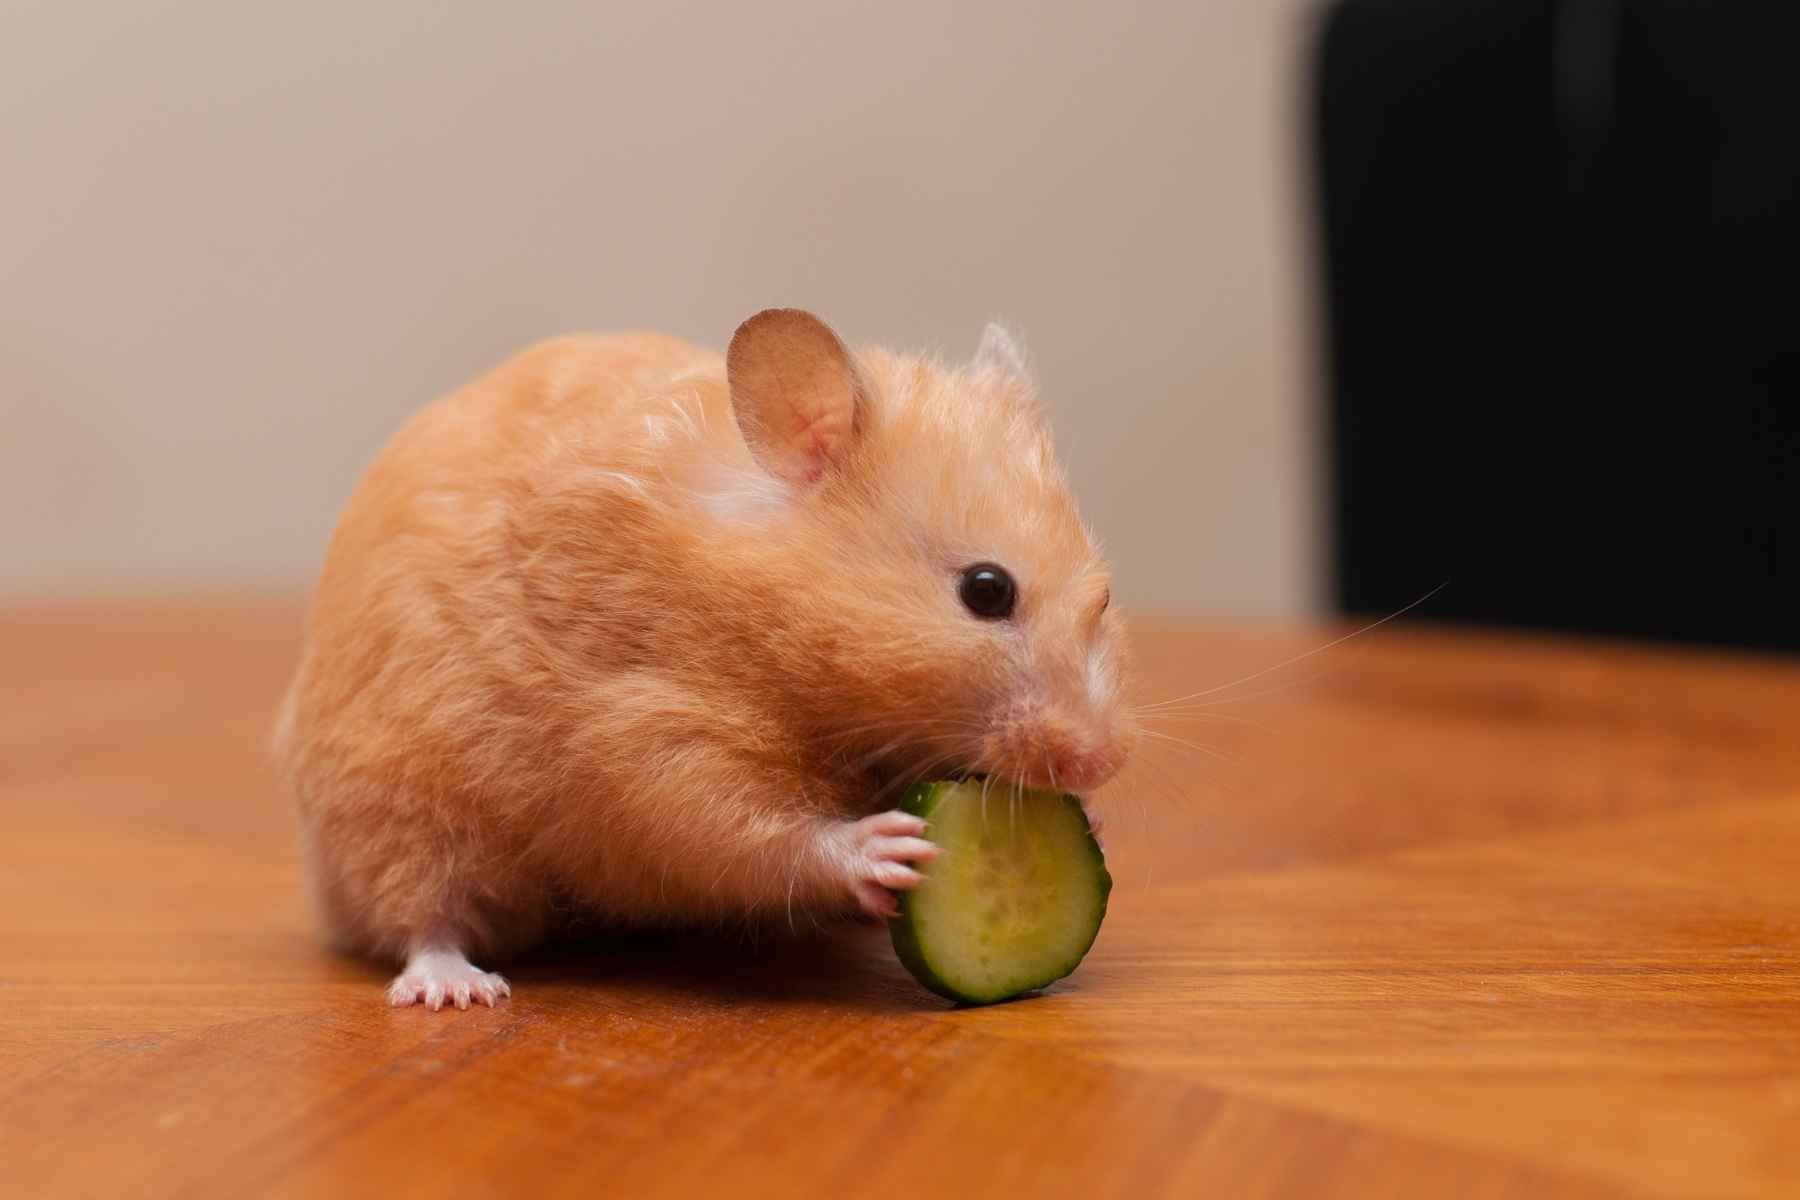 Hamster eating a piece of cucumber